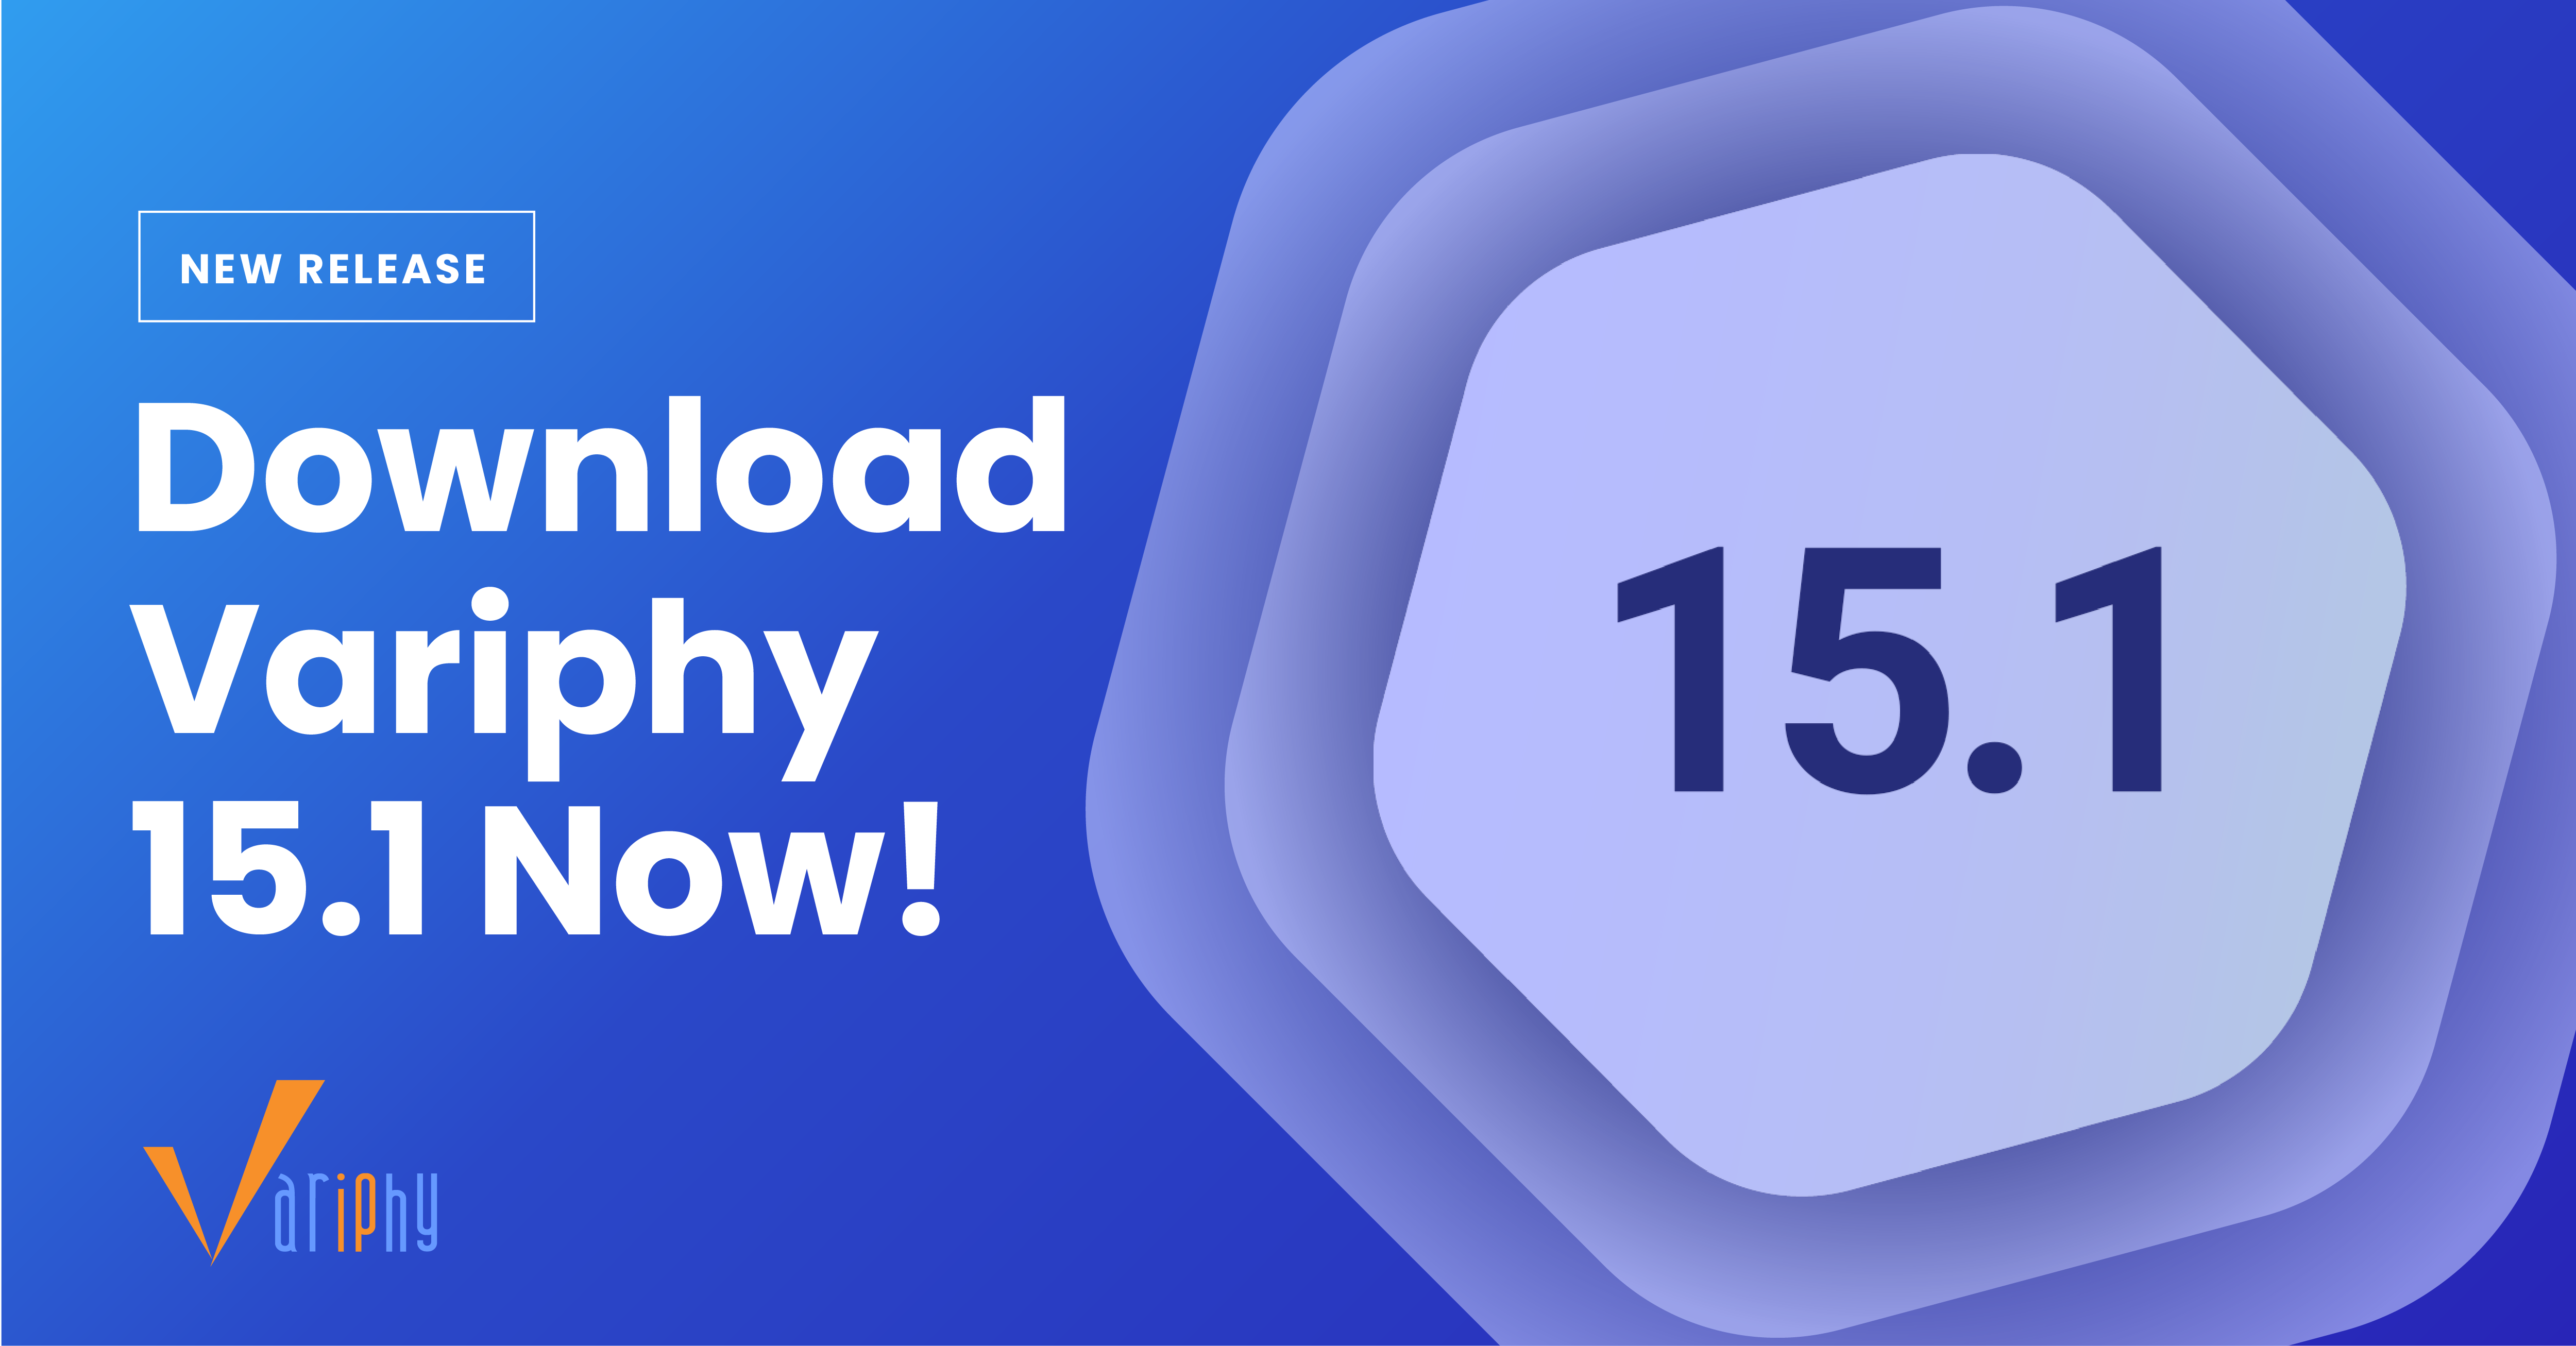 Download Variphy 15.1 Now